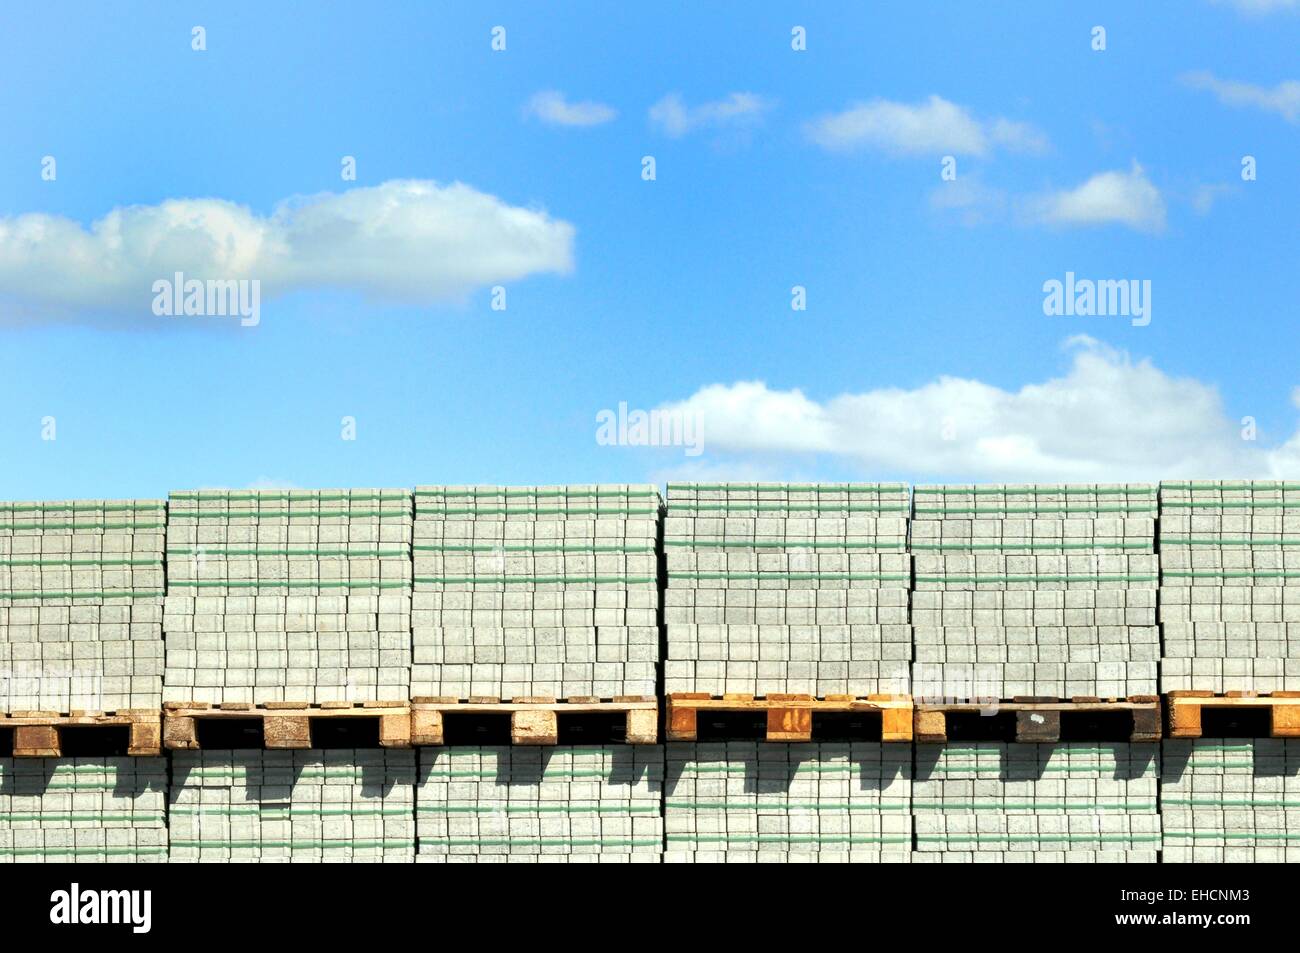 Paletten, Blue heaven with wall Stock Photo